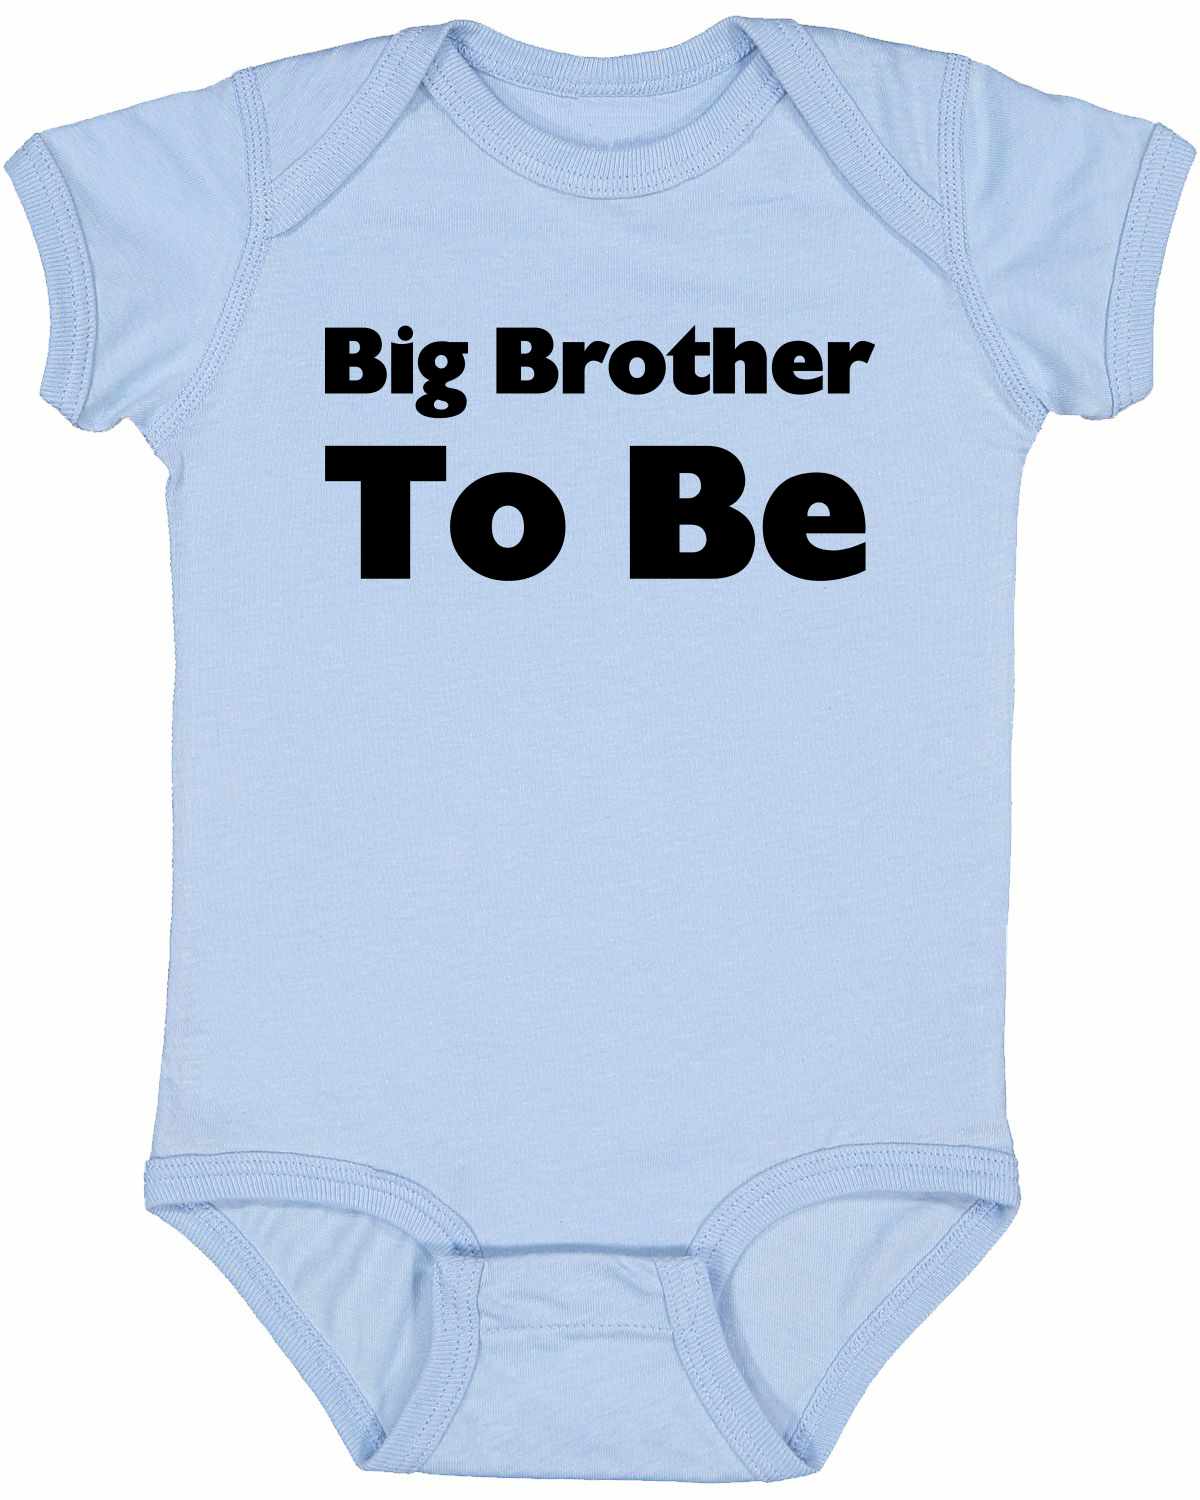 Big Brother To Be on Infant BodySuit